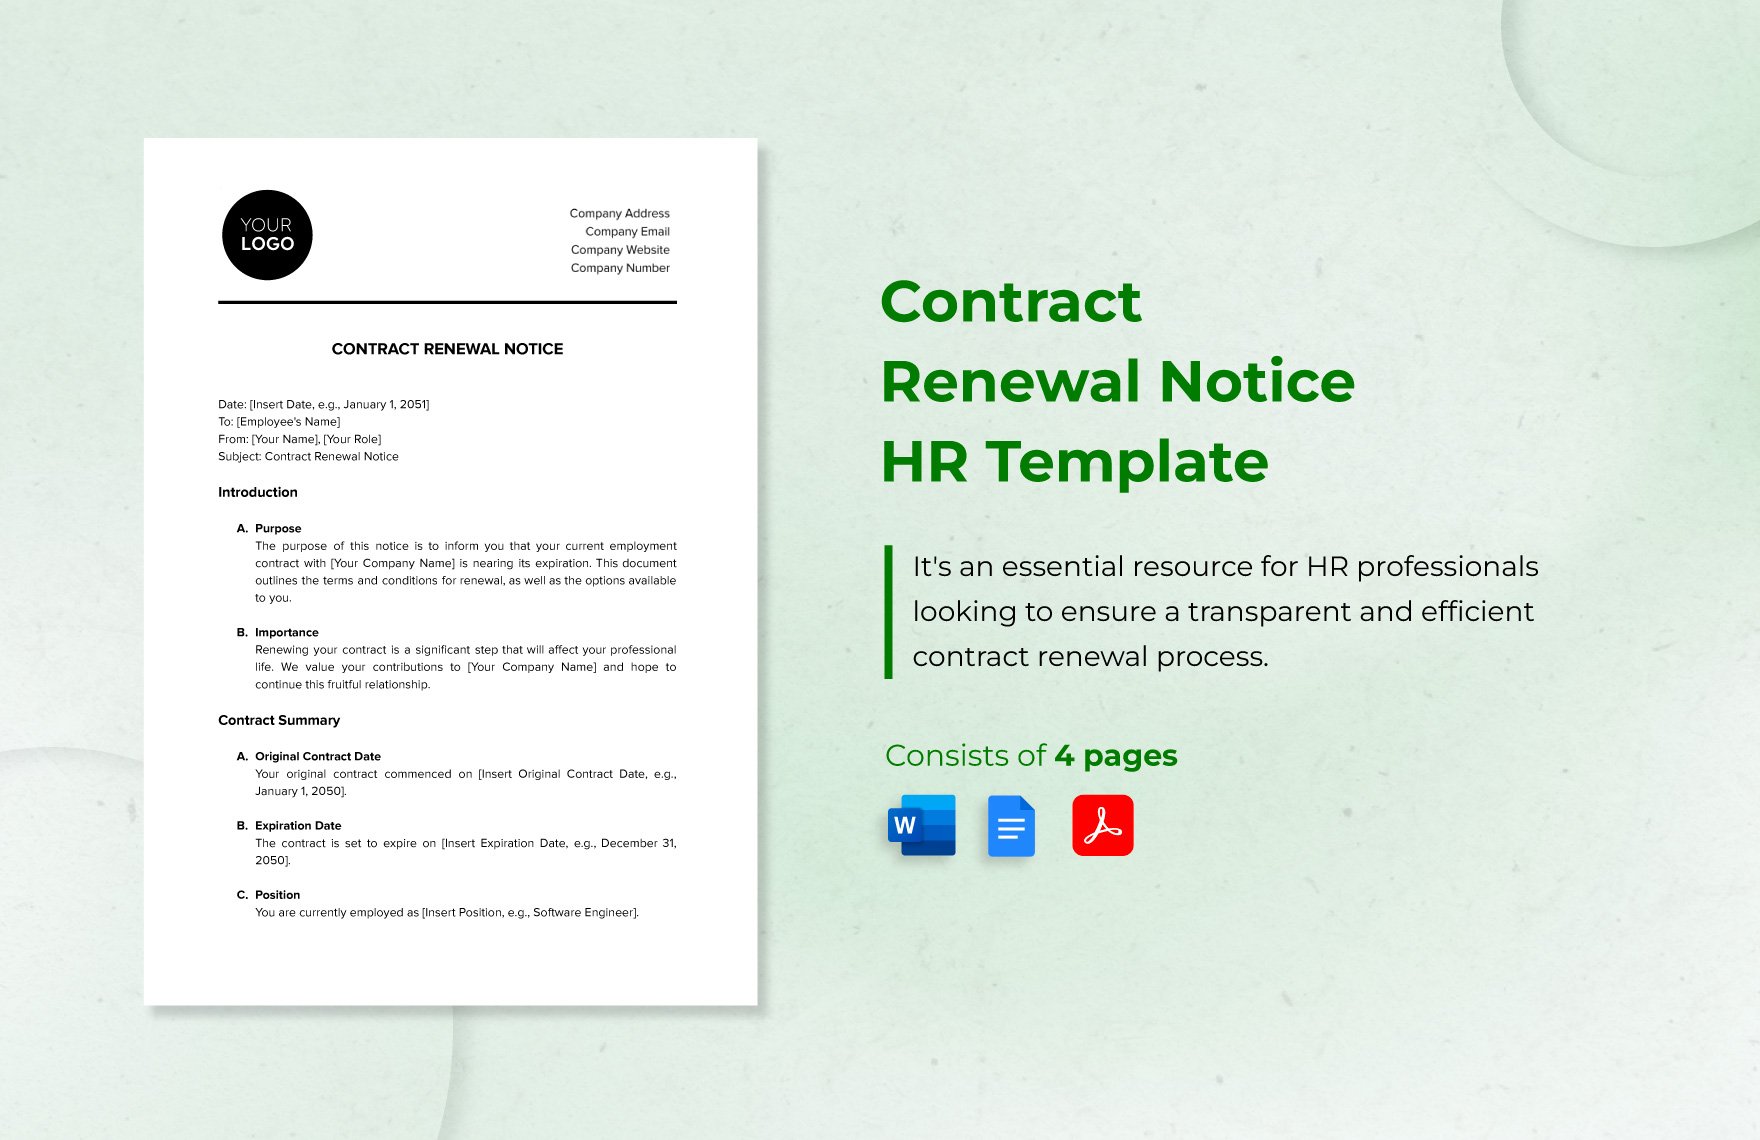 Contract Renewal Notice HR Template in Word, Google Docs, PDF